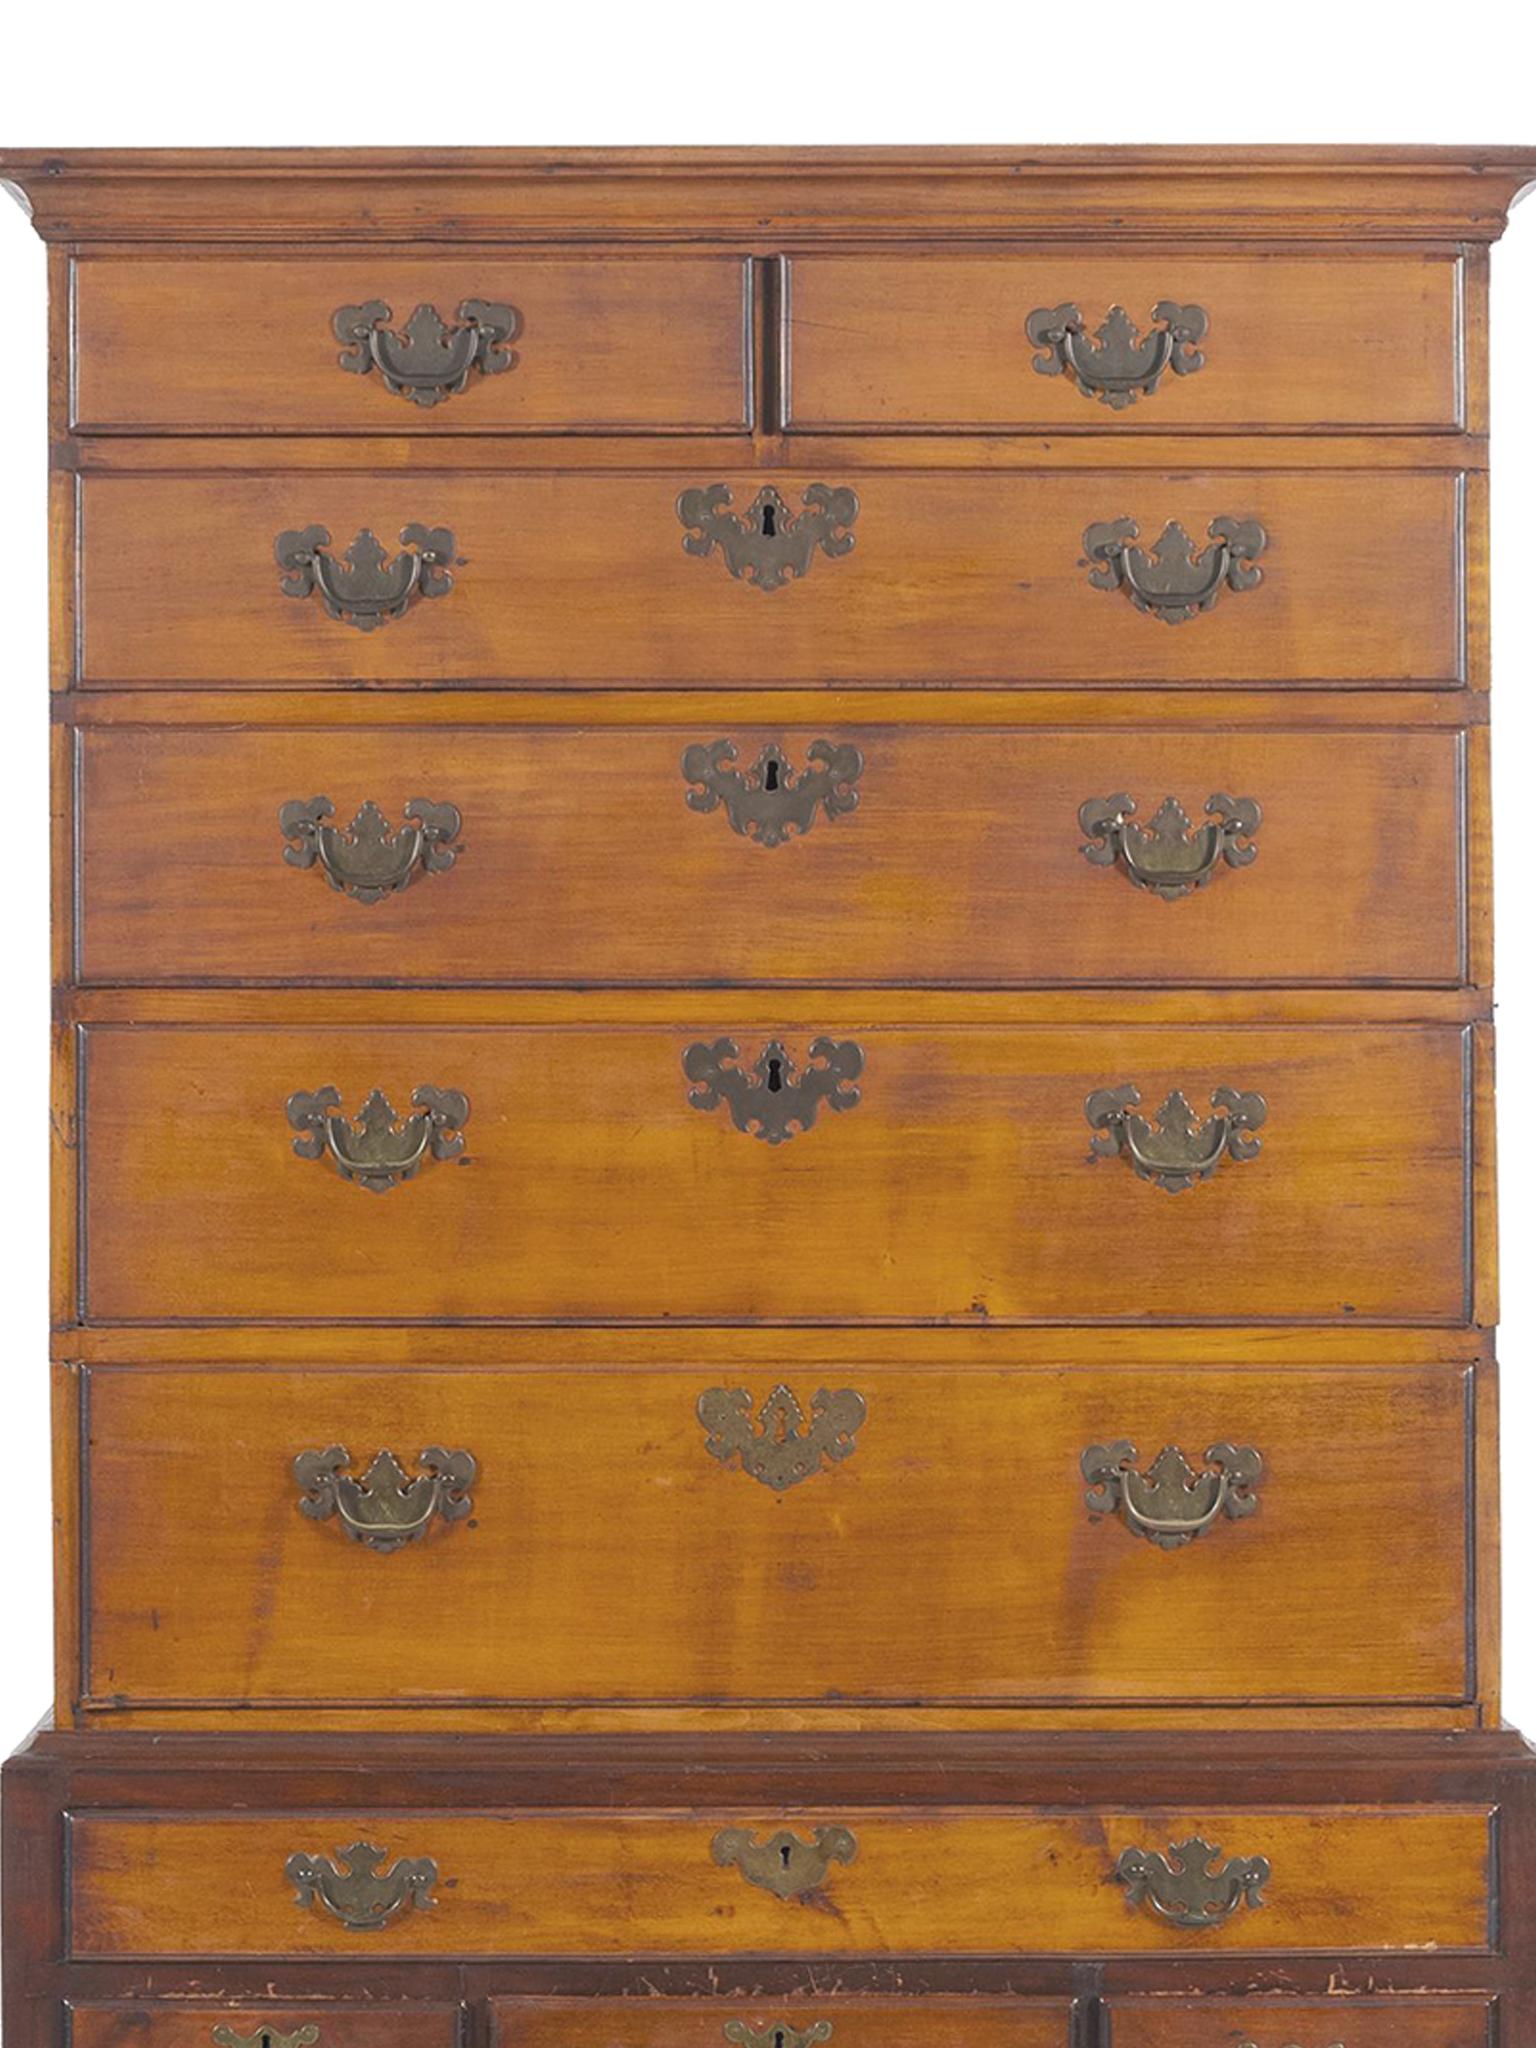 An 18th century highboy in the Connecticut Queen Anne style. The highboy is expertly crafted from cherry wood. It's comprised of two case pieces. The top segment is a flattop with 2 small drawers and 4 full length drawers. The bottom segment has 4